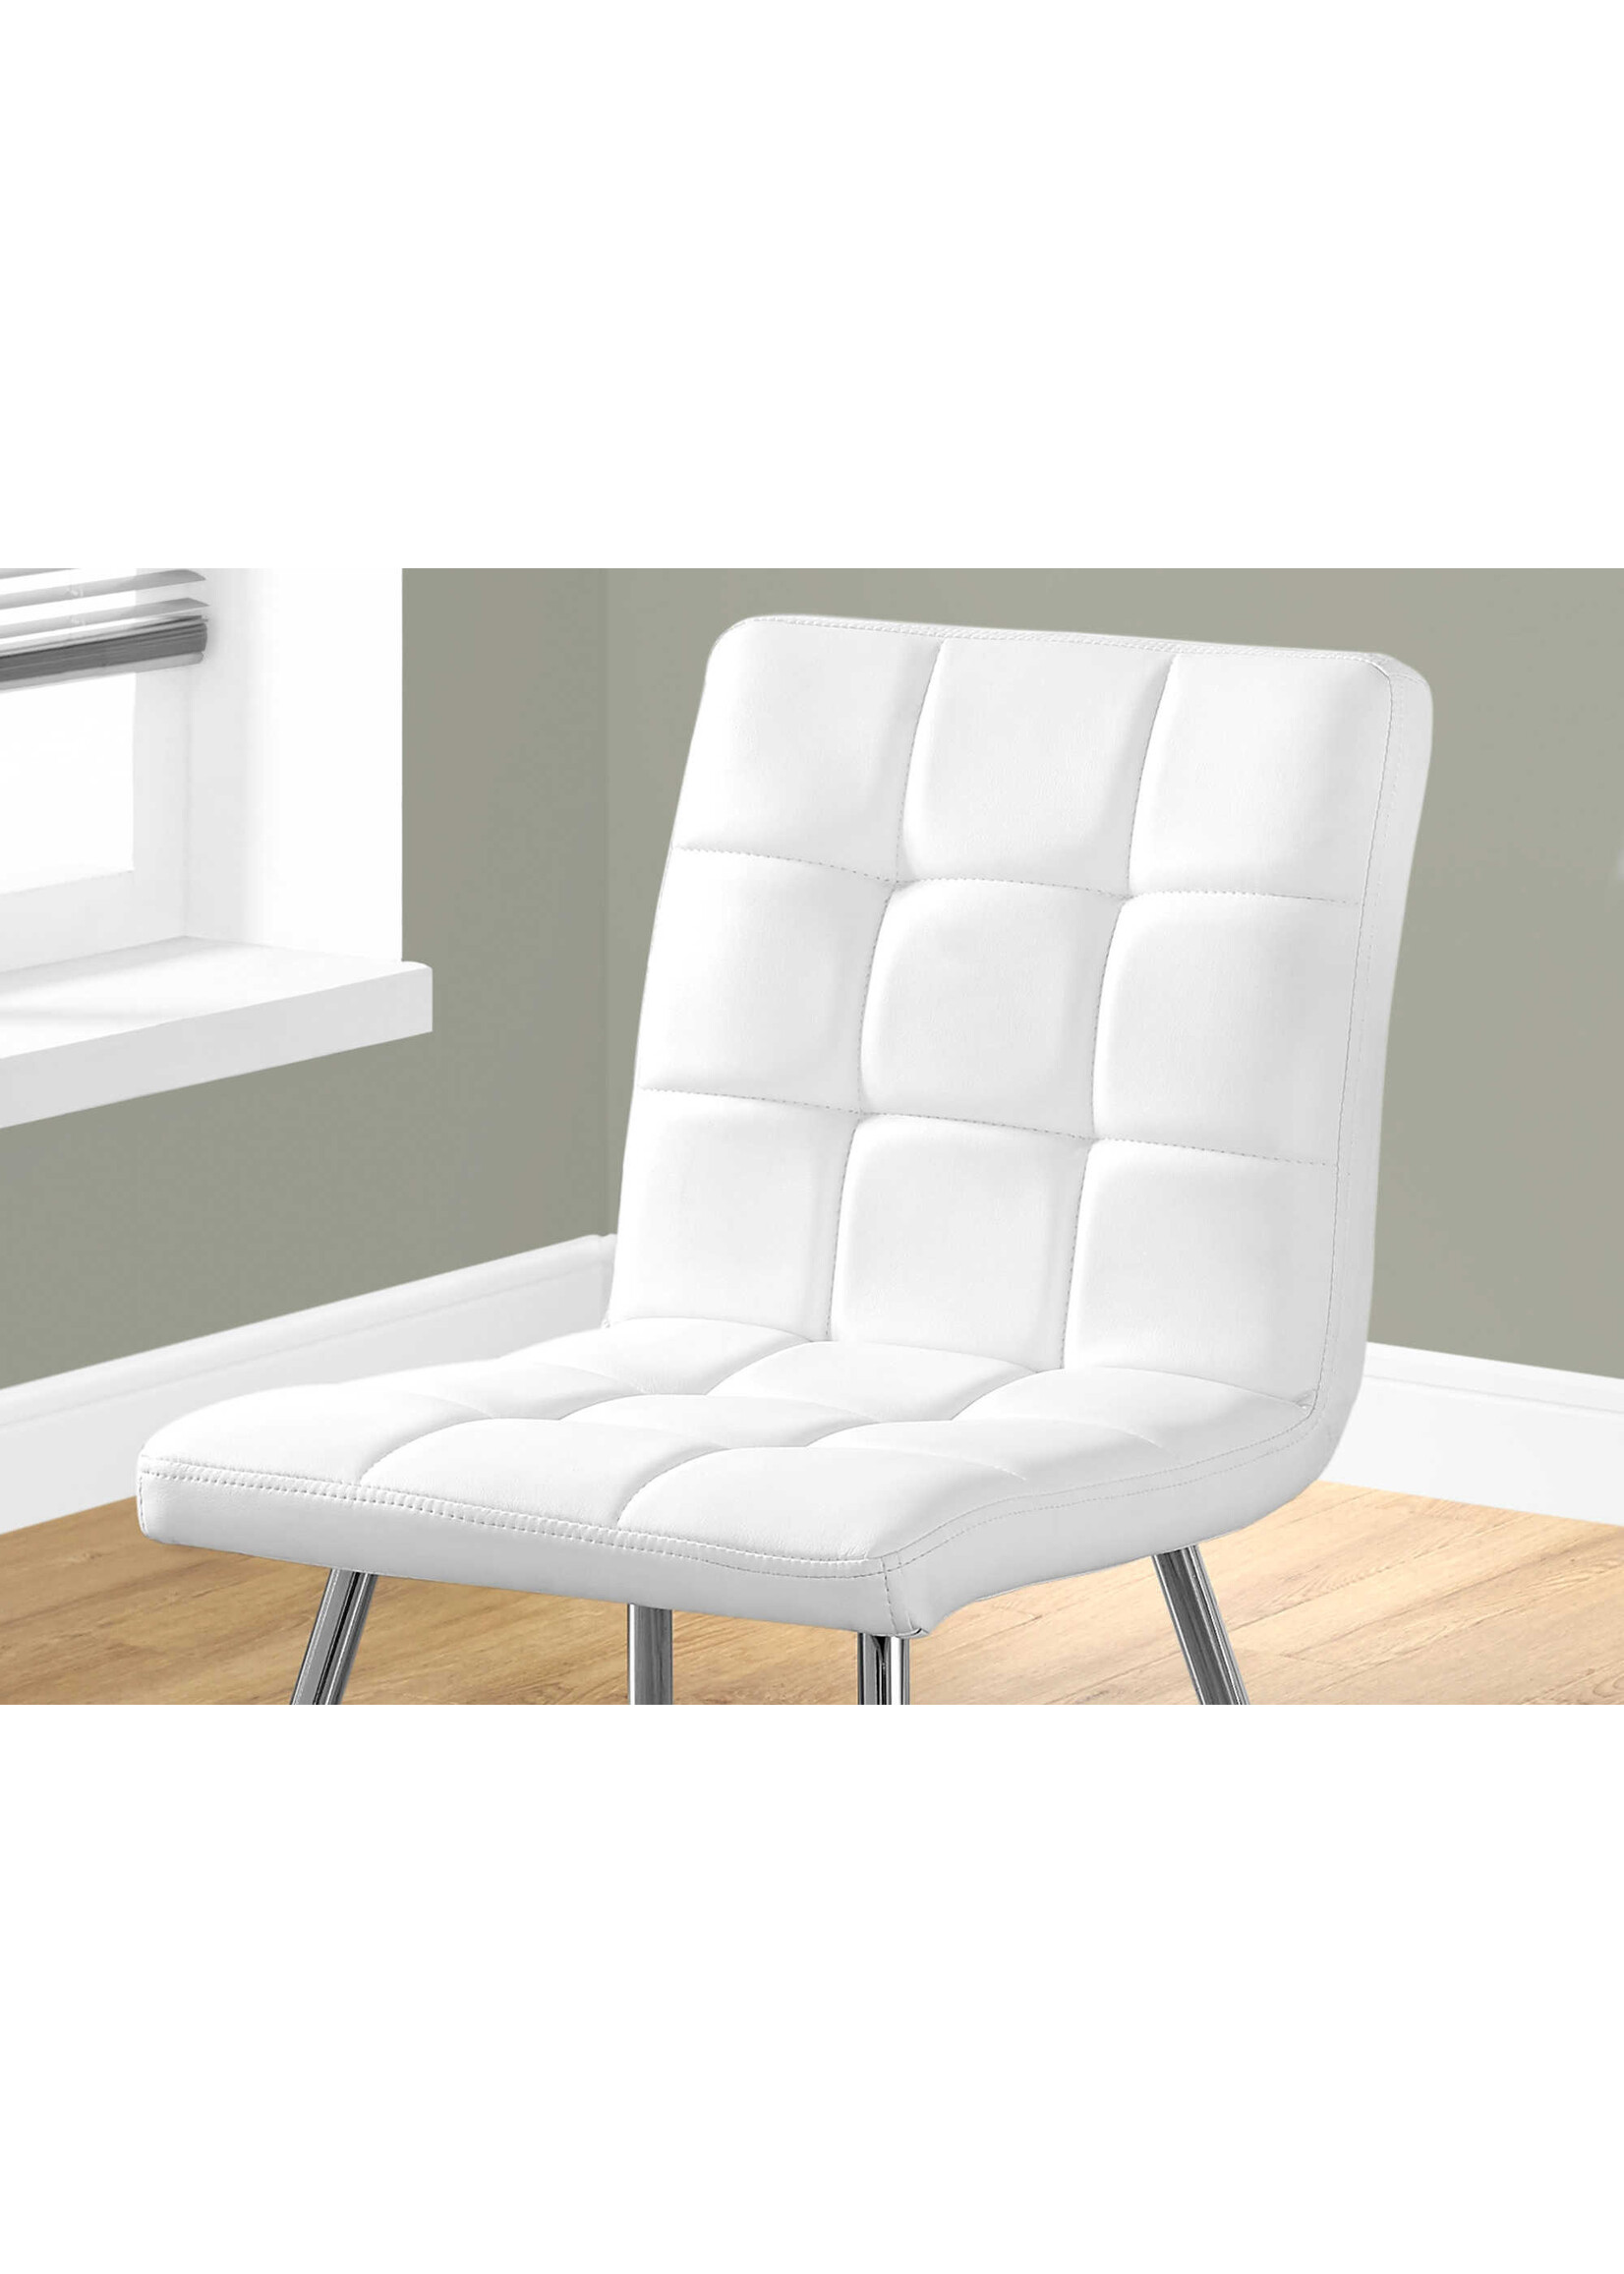 DINING CHAIR - 2PCS / 32"H / WHITE LEATHER-LOOK / CHROME